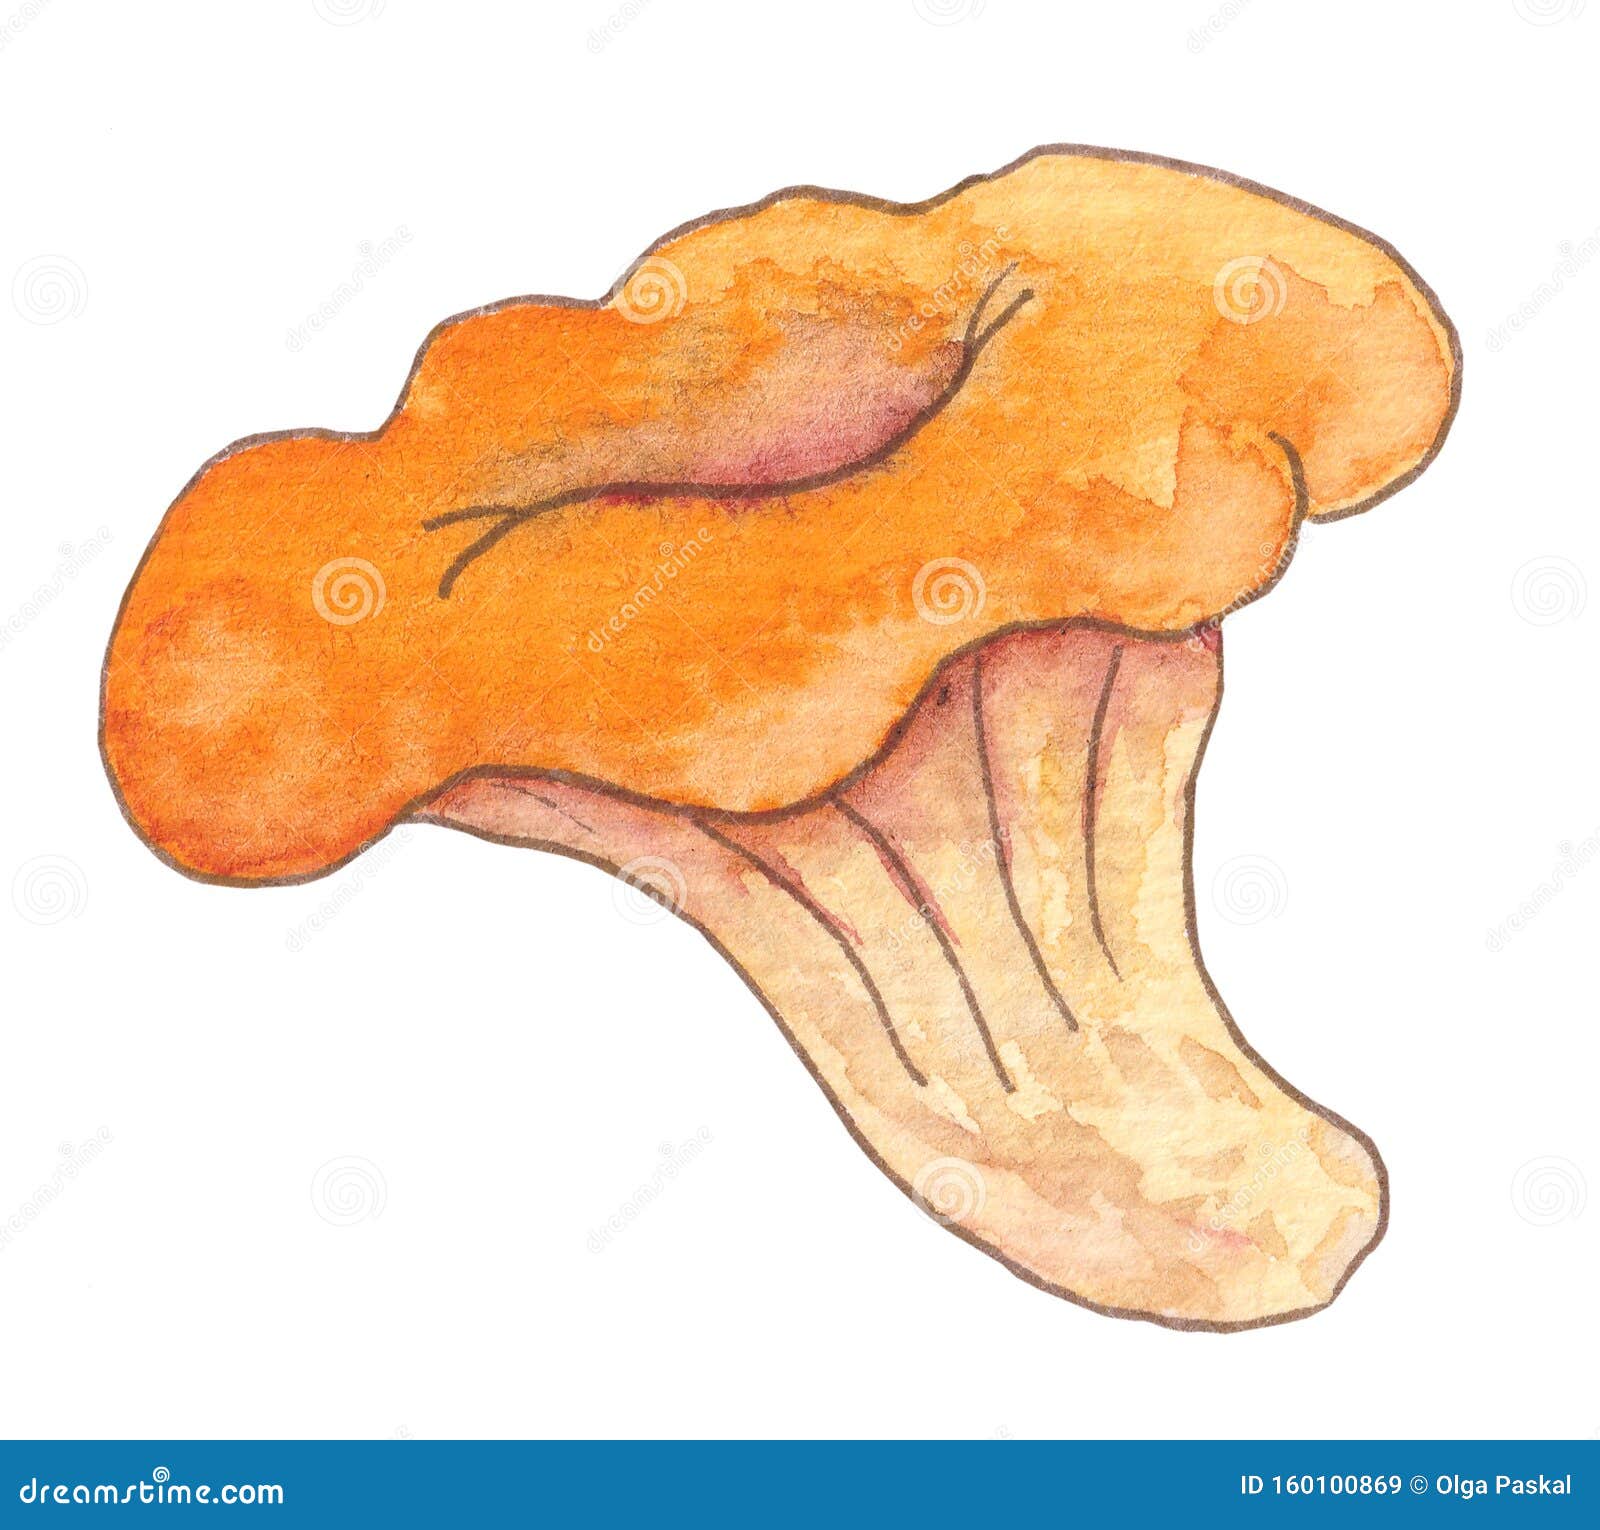 Mushroom Chanterelle Painted with Watercolor. Isolated on White ...